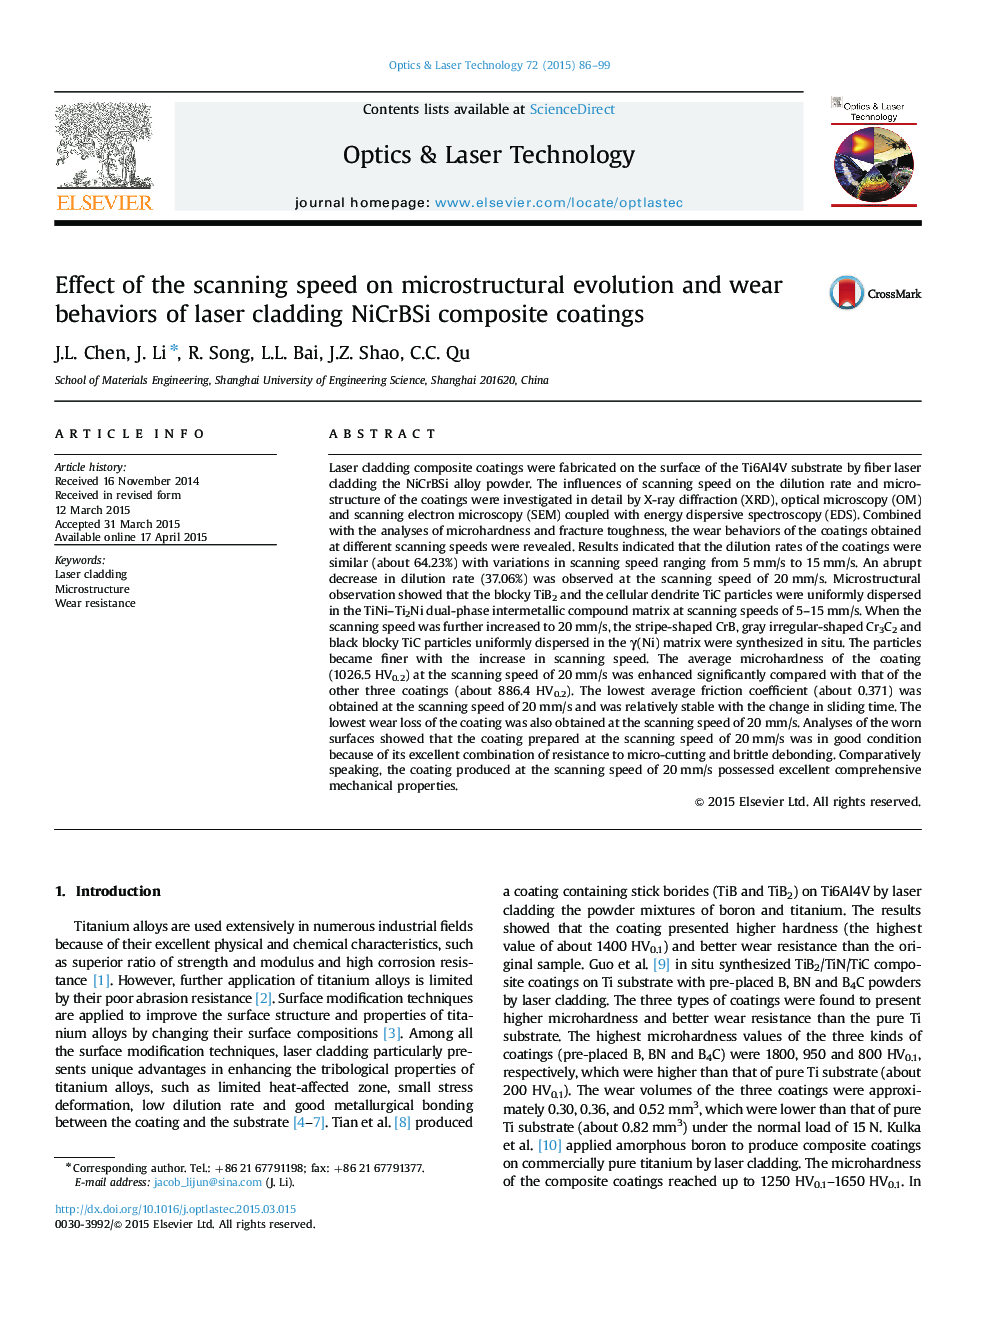 Effect of the scanning speed on microstructural evolution and wear behaviors of laser cladding NiCrBSi composite coatings